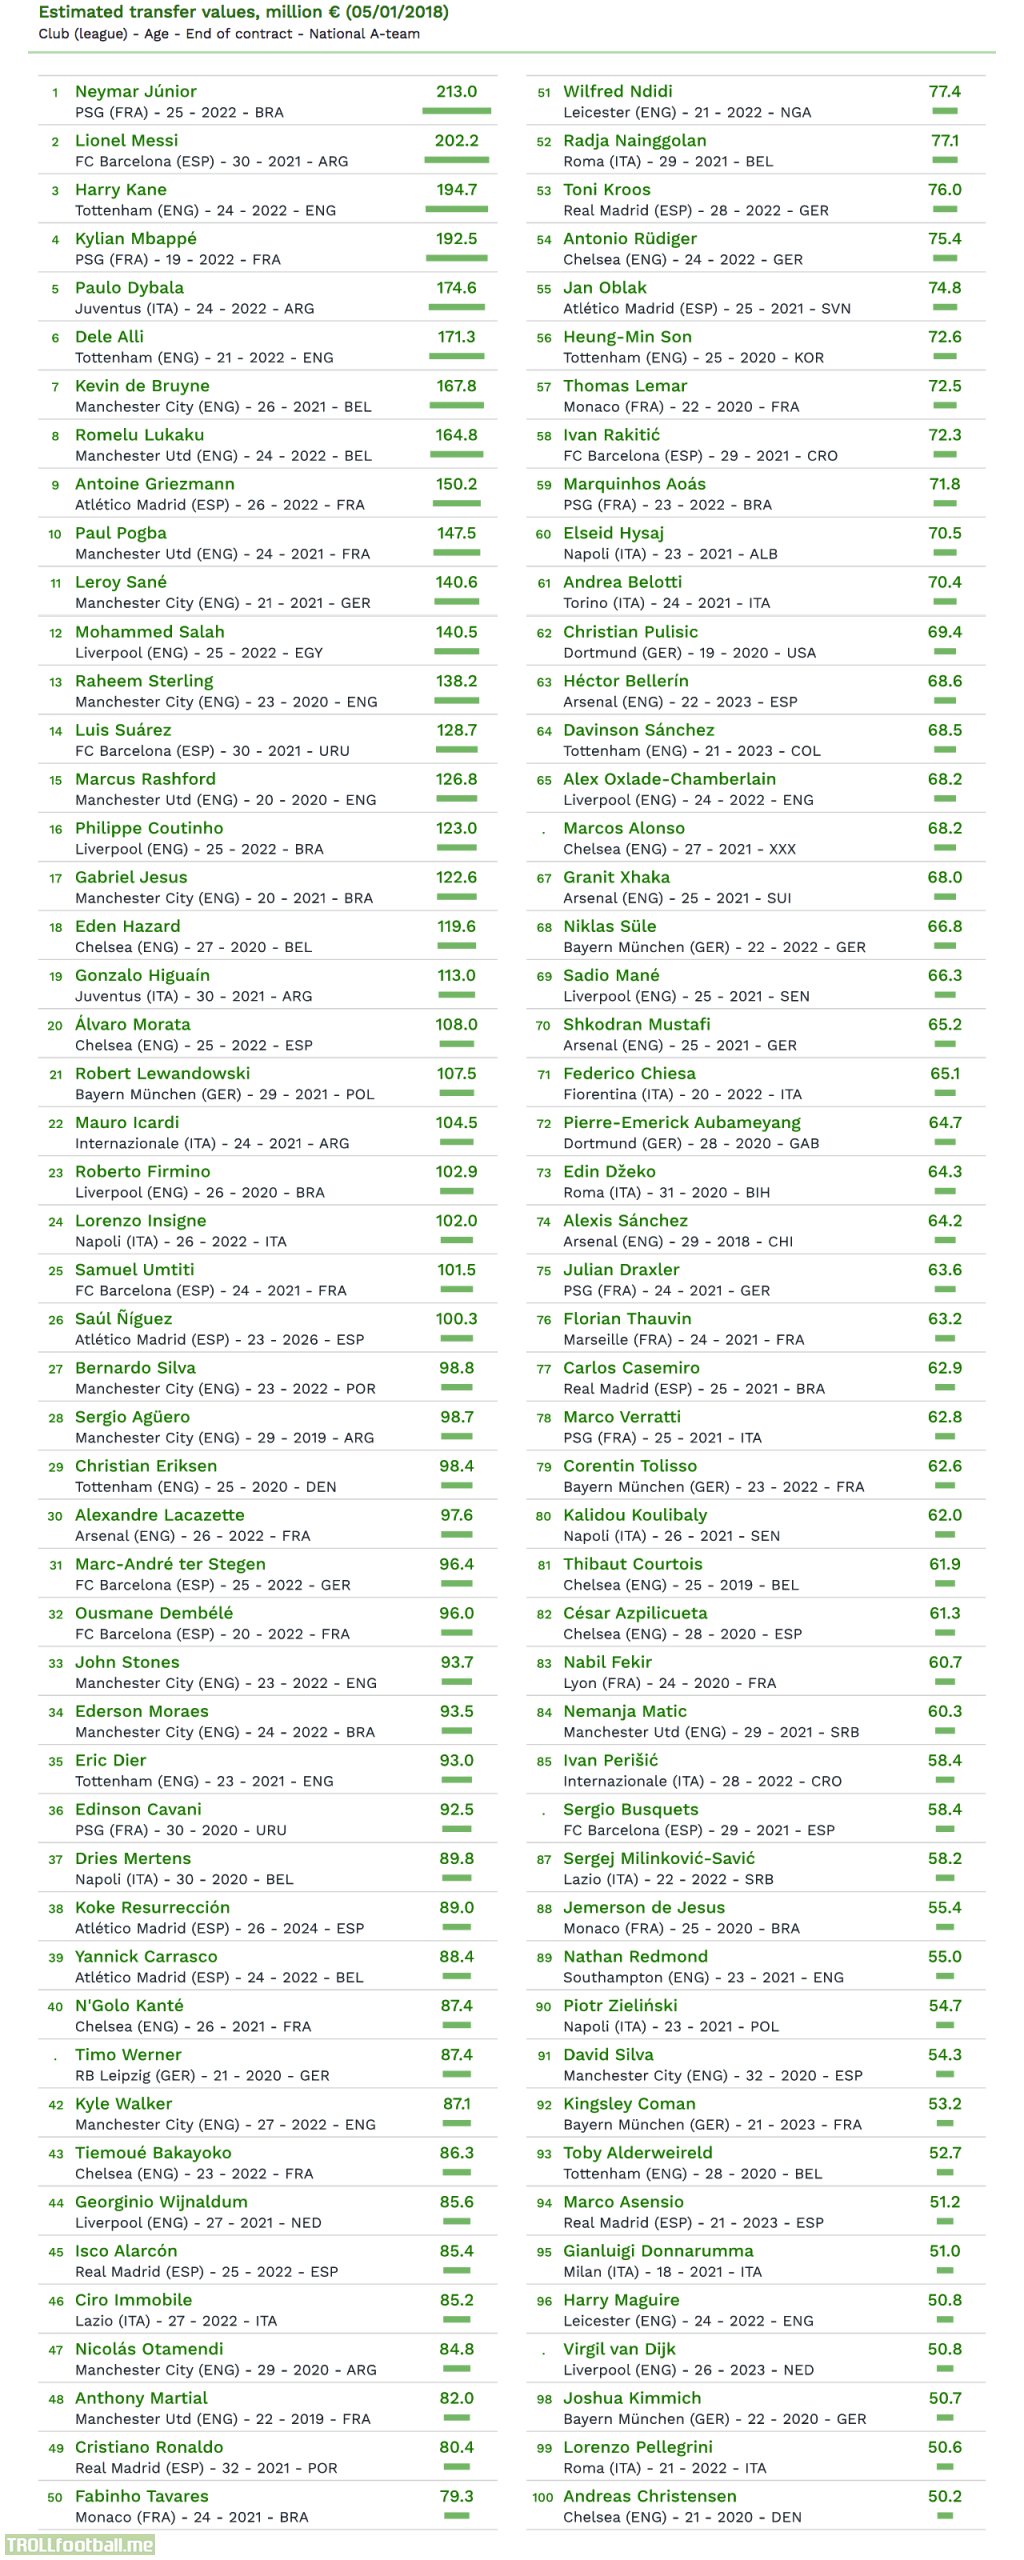 CIES Football Observatory's top 100 most valued players in the five major European leagues (January 2018). Top 5: Neymar, Messi, Kane, Mbappé and Dybala.